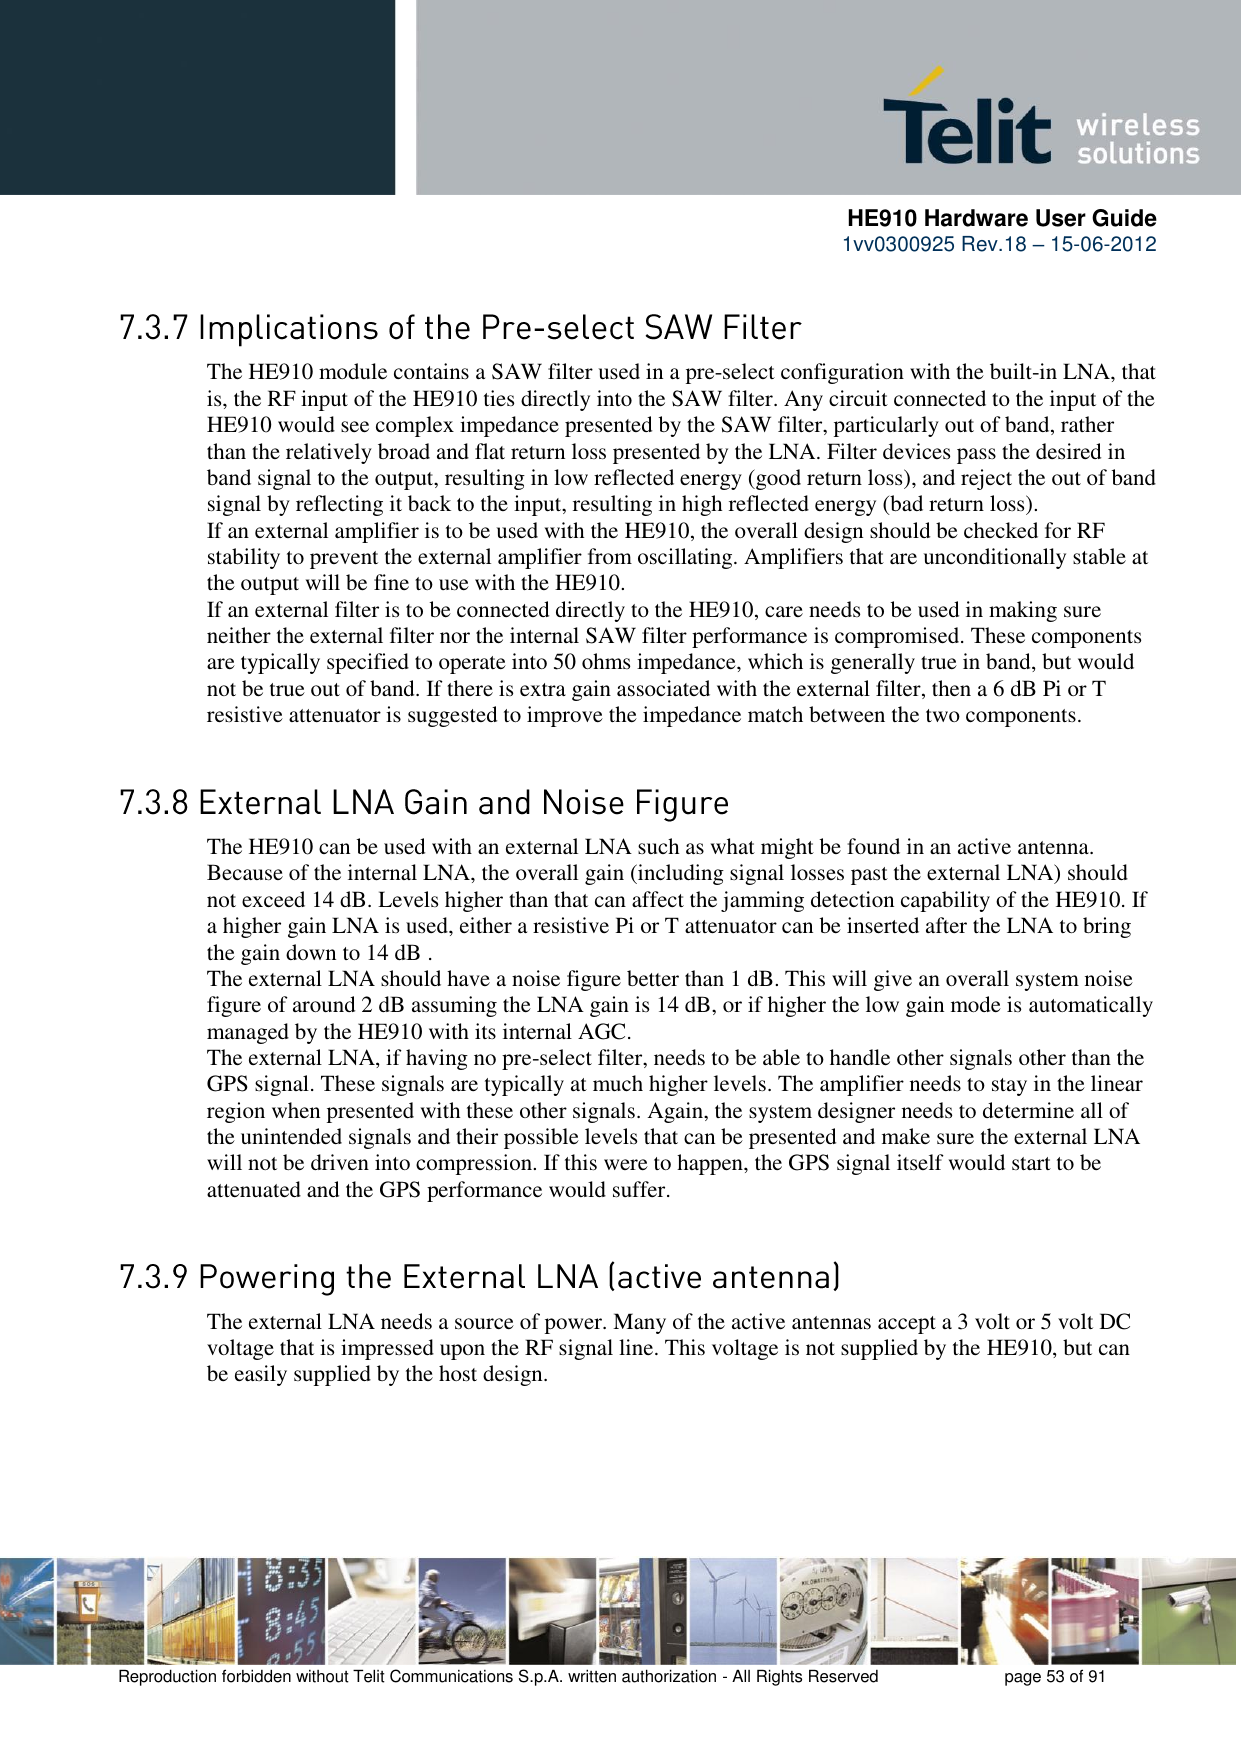      HE910 Hardware User Guide 1vv0300925 Rev.18 – 15-06-2012    Reproduction forbidden without Telit Communications S.p.A. written authorization - All Rights Reserved    page 53 of 91   The HE910 module contains a SAW filter used in a pre-select configuration with the built-in LNA, that is, the RF input of the HE910 ties directly into the SAW filter. Any circuit connected to the input of the HE910 would see complex impedance presented by the SAW filter, particularly out of band, rather than the relatively broad and flat return loss presented by the LNA. Filter devices pass the desired in band signal to the output, resulting in low reflected energy (good return loss), and reject the out of band signal by reflecting it back to the input, resulting in high reflected energy (bad return loss). If an external amplifier is to be used with the HE910, the overall design should be checked for RF stability to prevent the external amplifier from oscillating. Amplifiers that are unconditionally stable at the output will be fine to use with the HE910. If an external filter is to be connected directly to the HE910, care needs to be used in making sure neither the external filter nor the internal SAW filter performance is compromised. These components are typically specified to operate into 50 ohms impedance, which is generally true in band, but would not be true out of band. If there is extra gain associated with the external filter, then a 6 dB Pi or T resistive attenuator is suggested to improve the impedance match between the two components.   The HE910 can be used with an external LNA such as what might be found in an active antenna. Because of the internal LNA, the overall gain (including signal losses past the external LNA) should not exceed 14 dB. Levels higher than that can affect the jamming detection capability of the HE910. If a higher gain LNA is used, either a resistive Pi or T attenuator can be inserted after the LNA to bring the gain down to 14 dB . The external LNA should have a noise figure better than 1 dB. This will give an overall system noise figure of around 2 dB assuming the LNA gain is 14 dB, or if higher the low gain mode is automatically managed by the HE910 with its internal AGC. The external LNA, if having no pre-select filter, needs to be able to handle other signals other than the GPS signal. These signals are typically at much higher levels. The amplifier needs to stay in the linear region when presented with these other signals. Again, the system designer needs to determine all of the unintended signals and their possible levels that can be presented and make sure the external LNA will not be driven into compression. If this were to happen, the GPS signal itself would start to be attenuated and the GPS performance would suffer.   The external LNA needs a source of power. Many of the active antennas accept a 3 volt or 5 volt DC voltage that is impressed upon the RF signal line. This voltage is not supplied by the HE910, but can be easily supplied by the host design.   